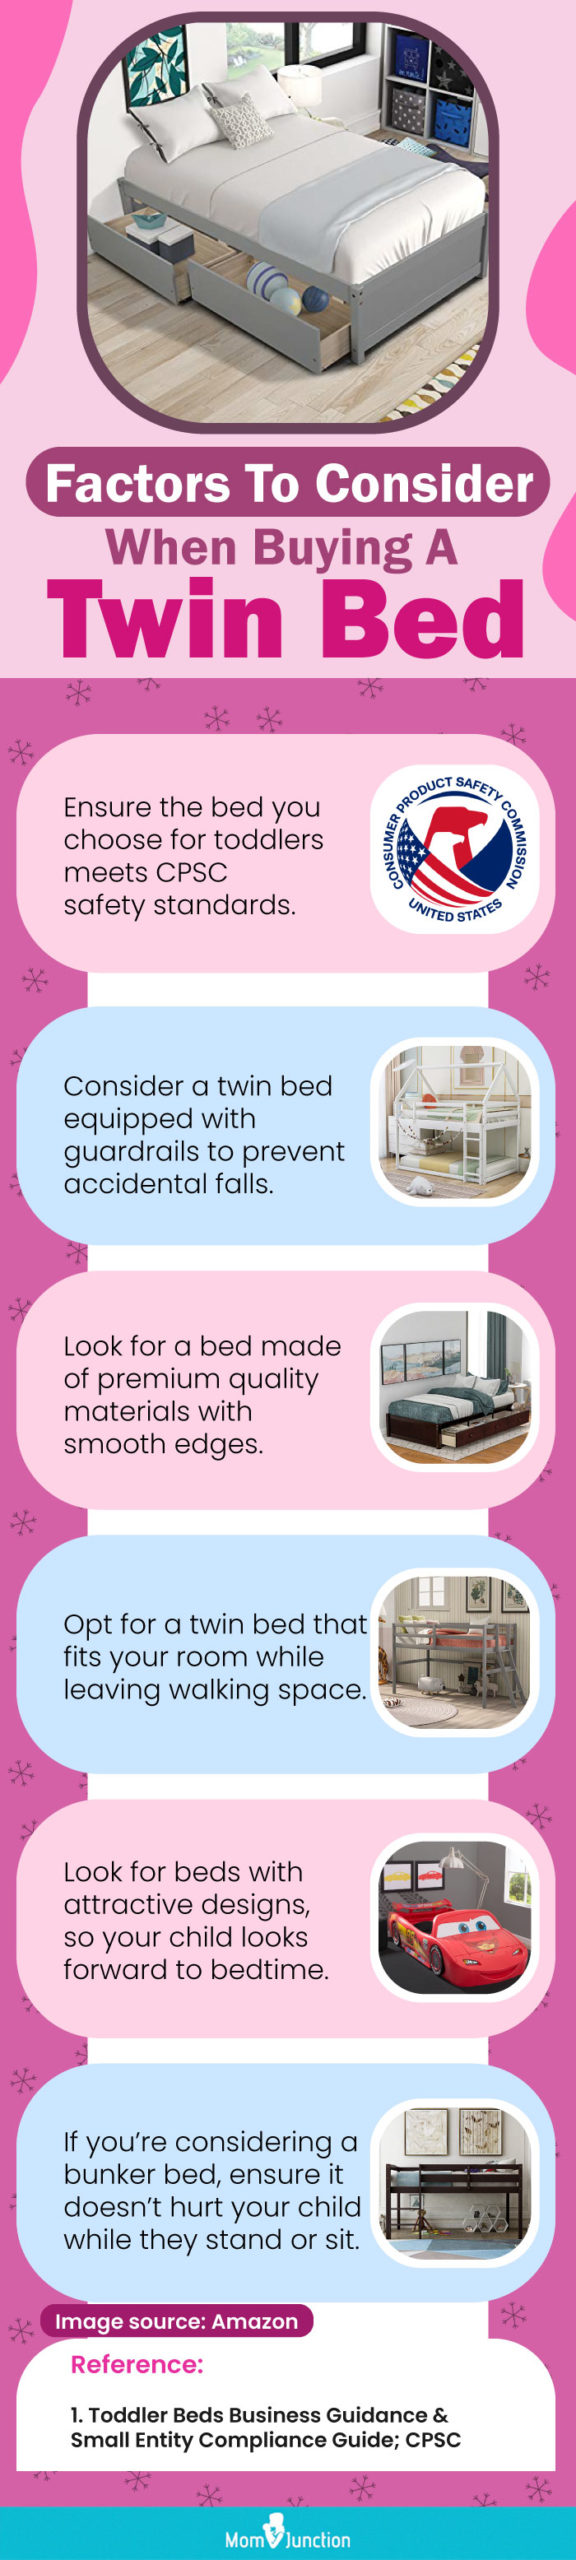 Factors To Consider When Buying A Twin Bed (Infographic)